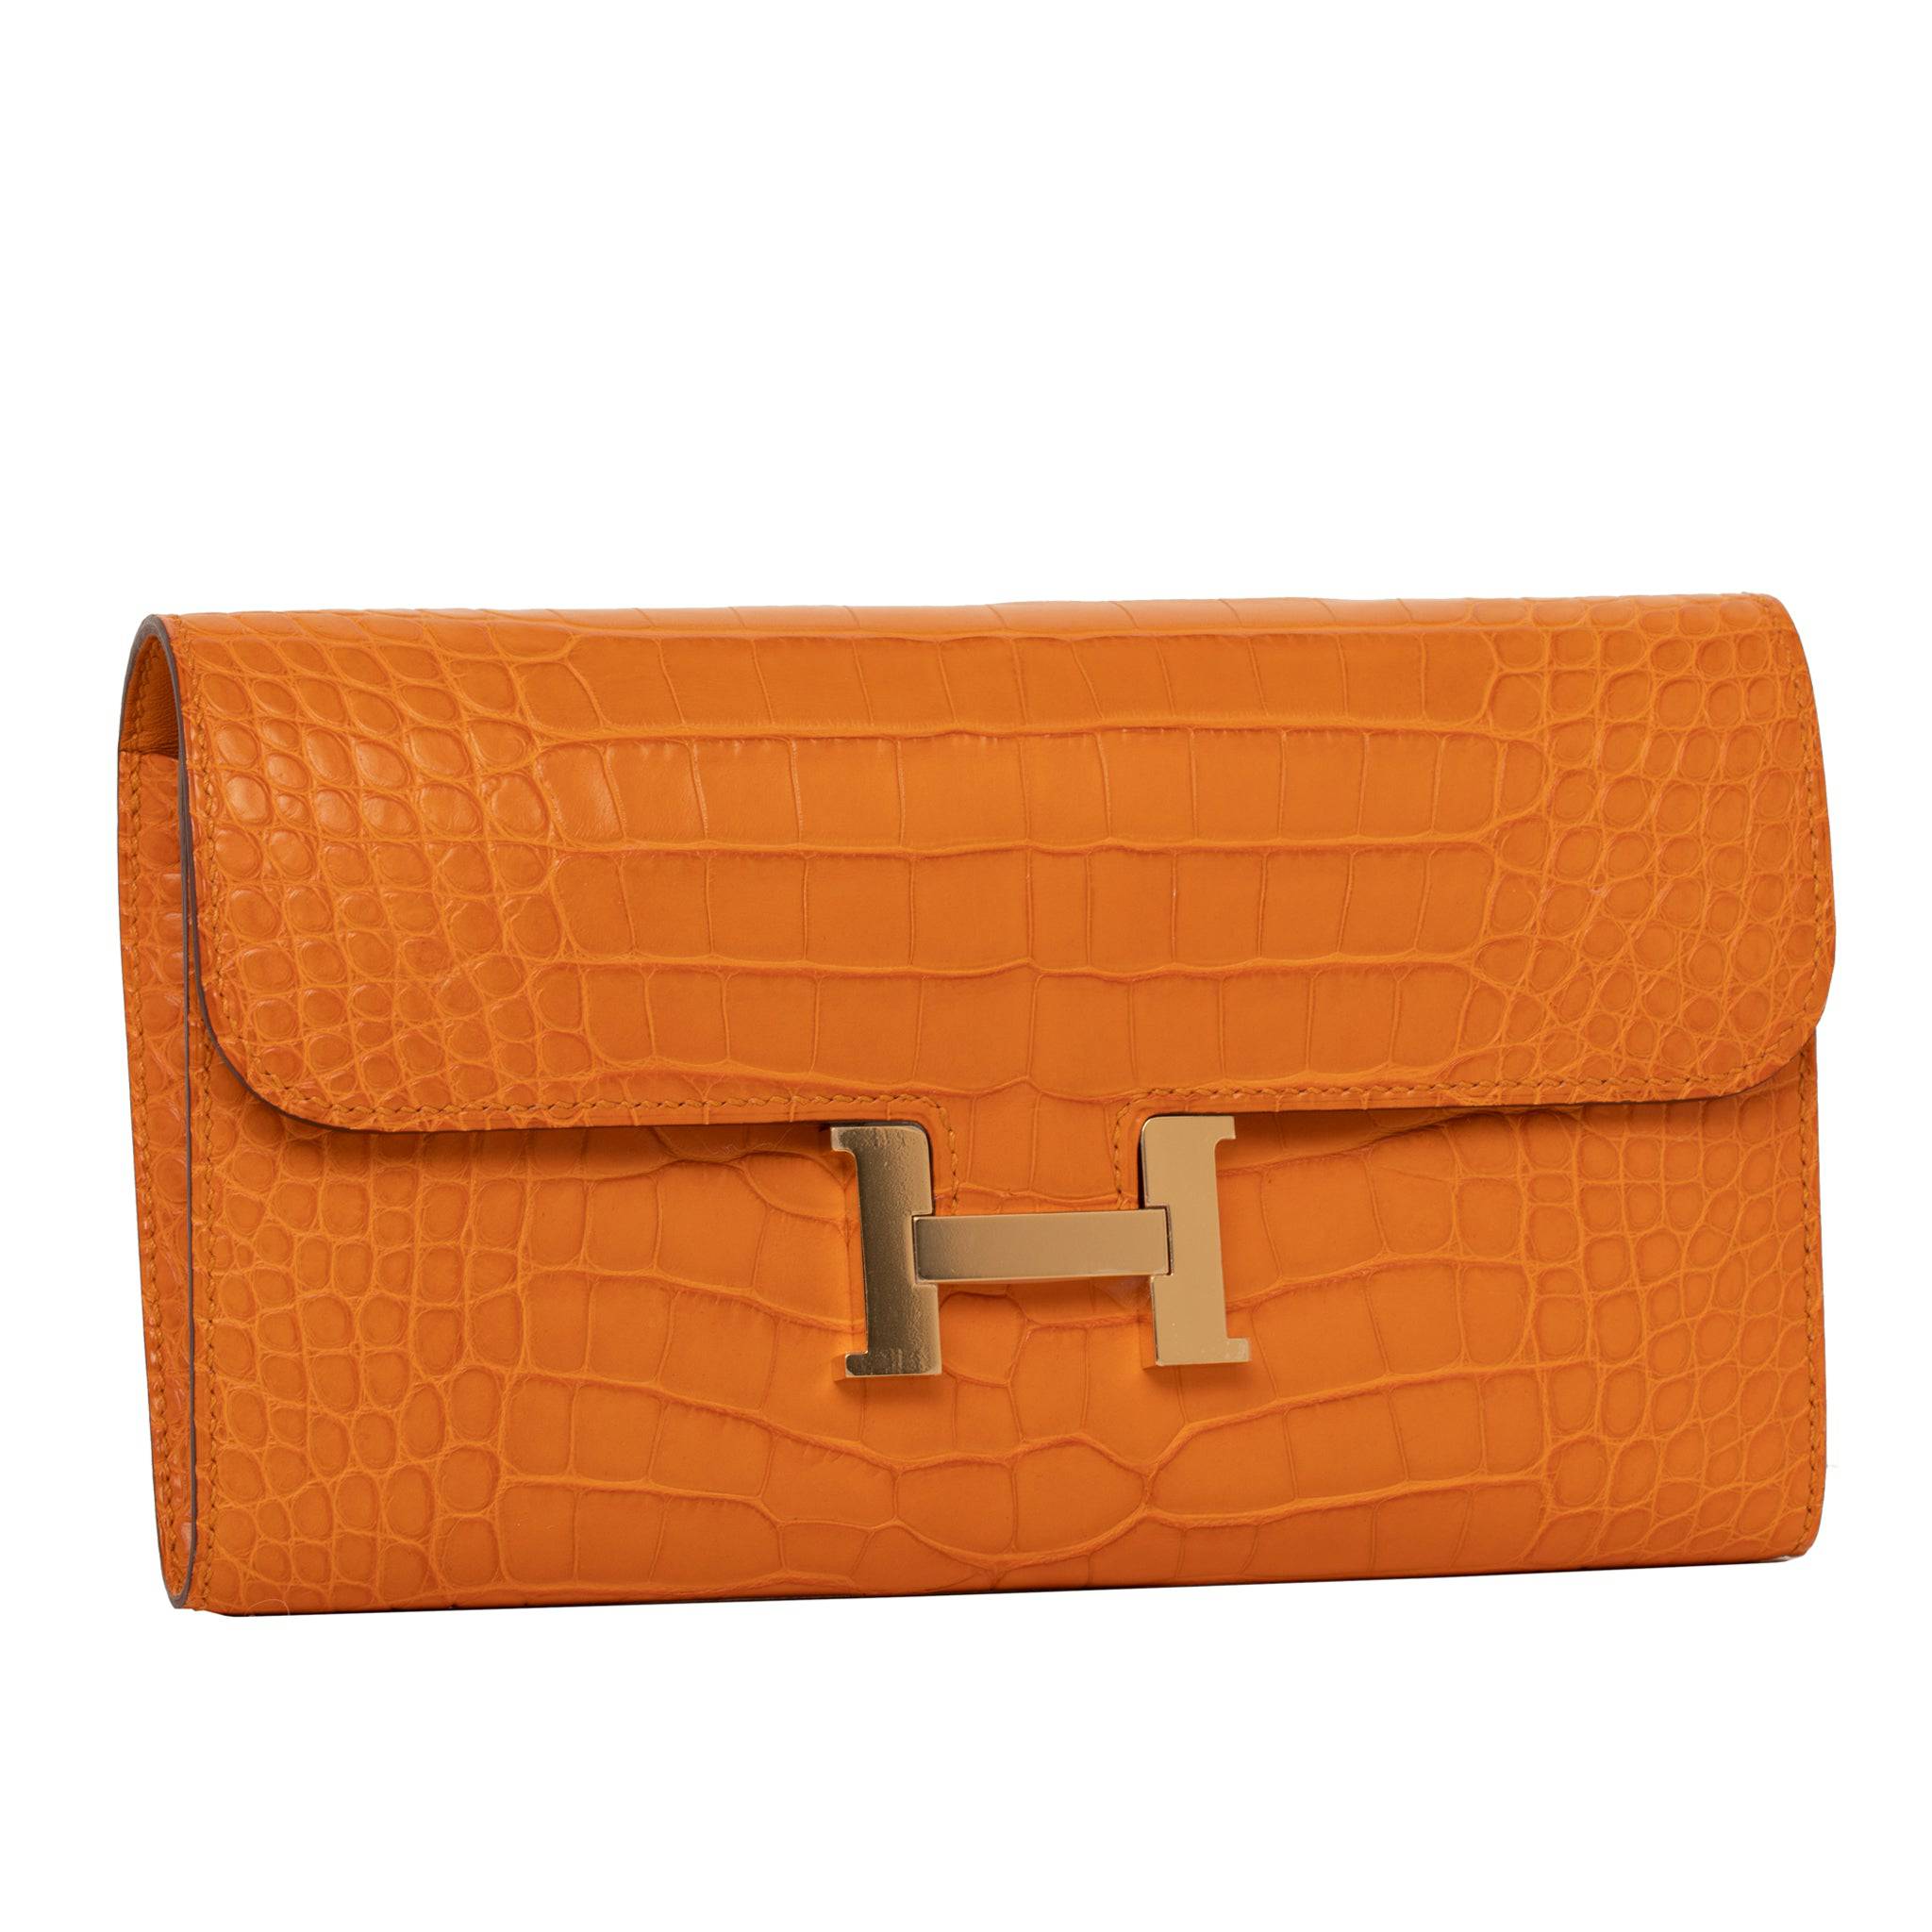 HERMES CONSTANCE WALLET ABRICOT MATTE ALLIGATOR GOLD HARDWARE - On Repeat